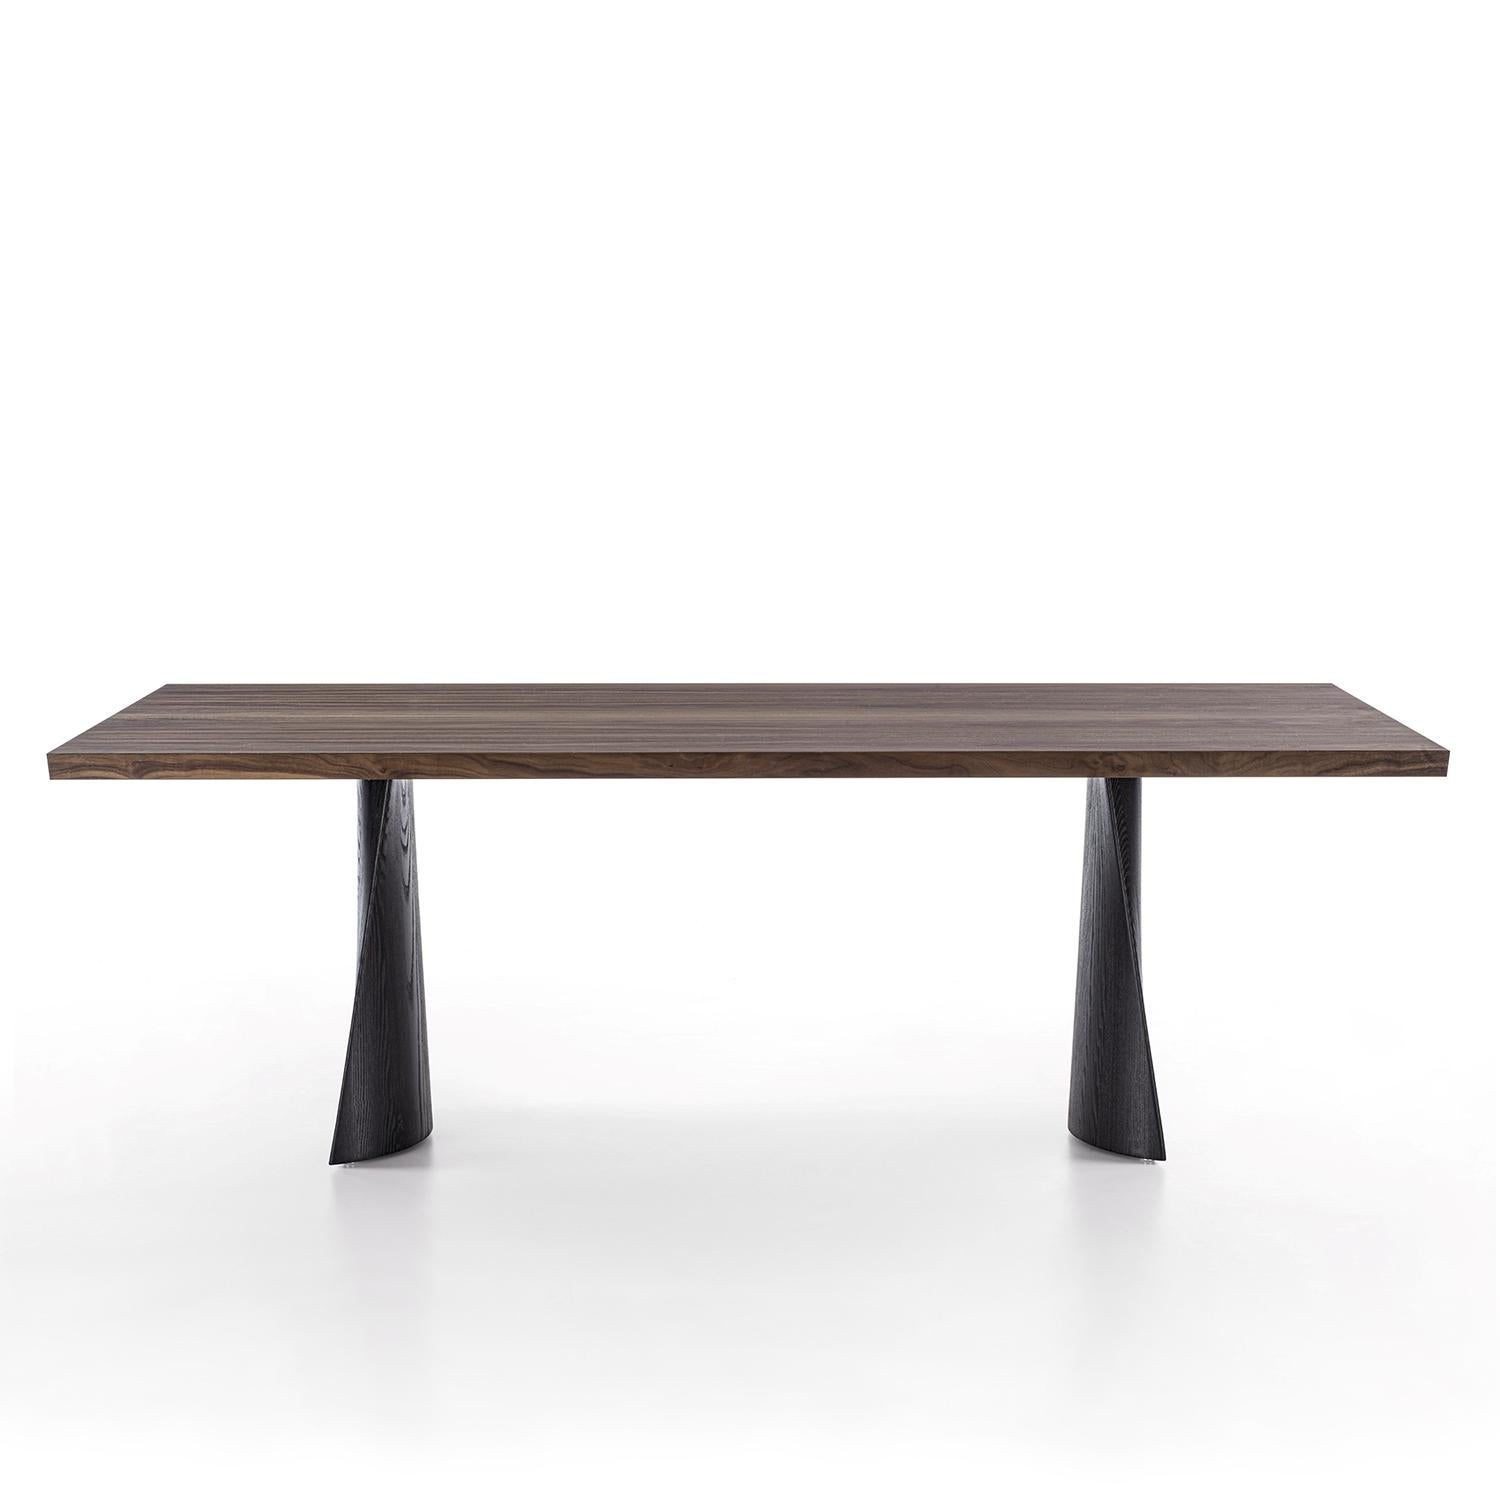 Dining Table Goma with table top in walnut 
wood with bevelled edges, with 2 feet base 
in solid wood in pigmented all black finish.
Available on request in:
L220xD100xH75cm, price: 8900,00€
L240xD100xH75cm, price: 9500,00€
L260xD100xH75cm,